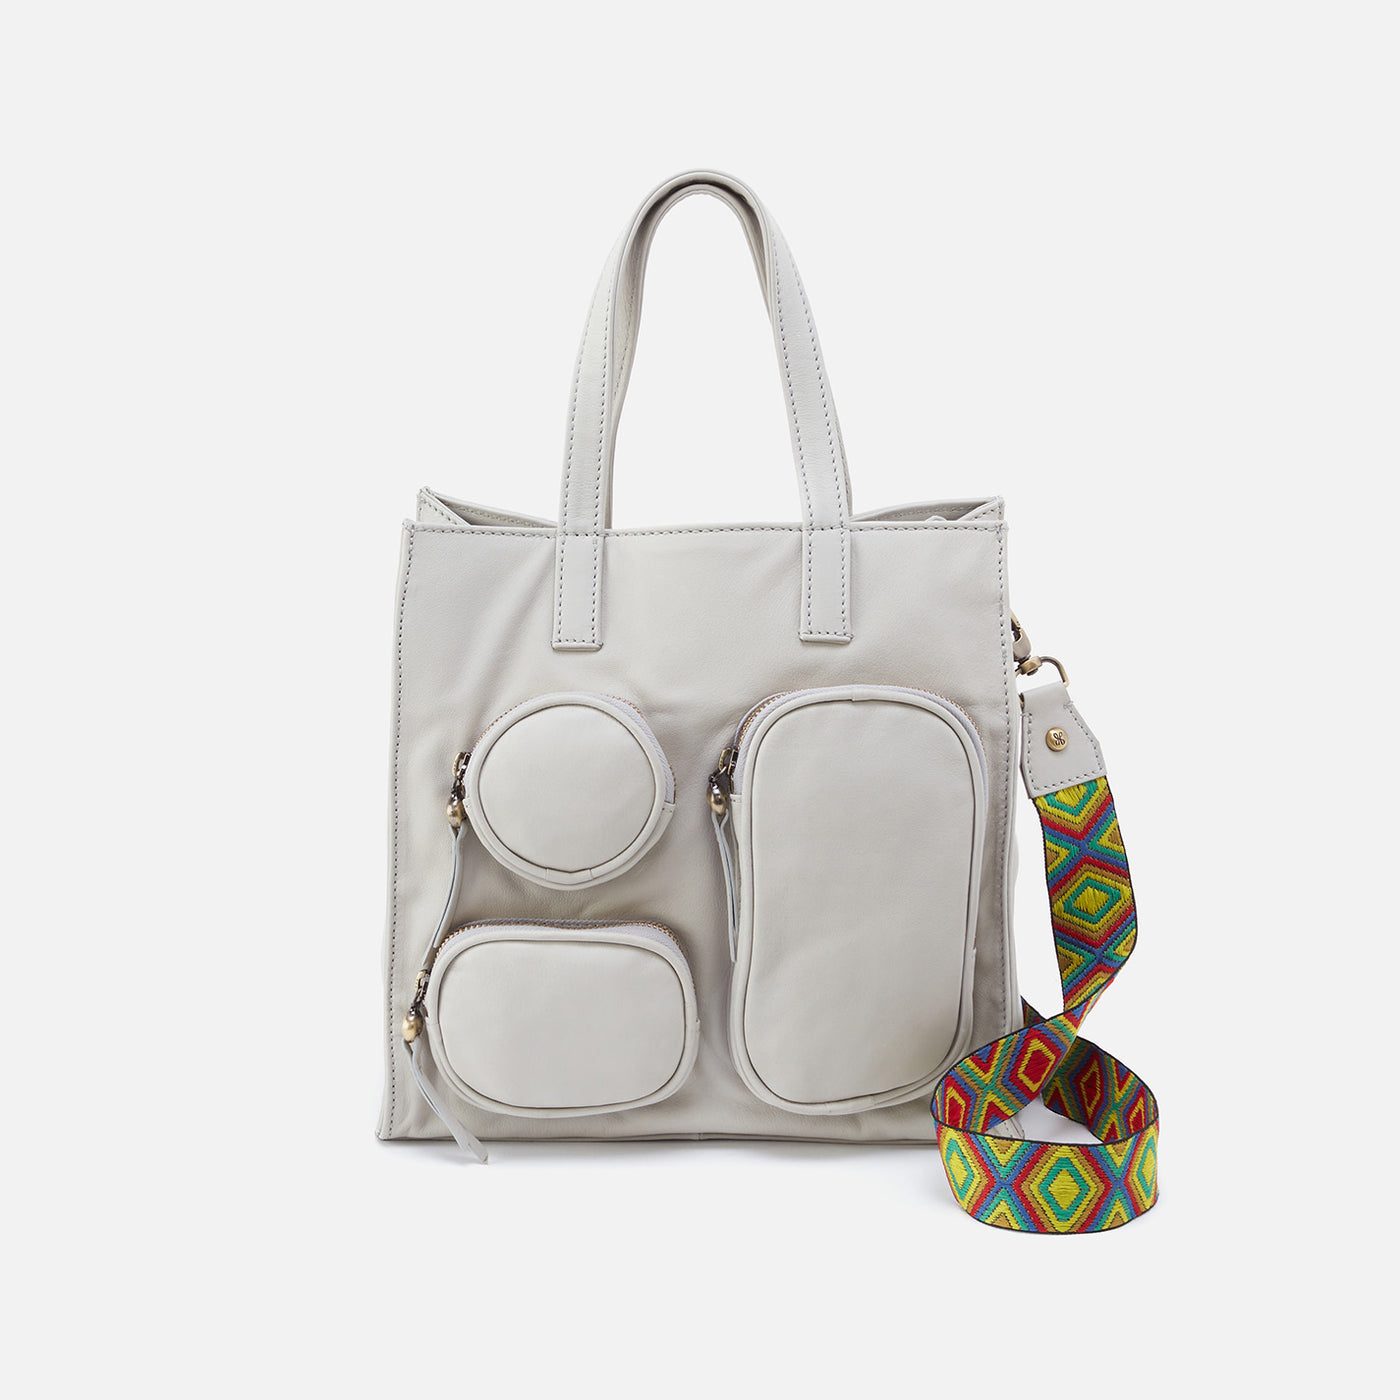 Shaker Utility Tote in Soft Leather - Light Grey